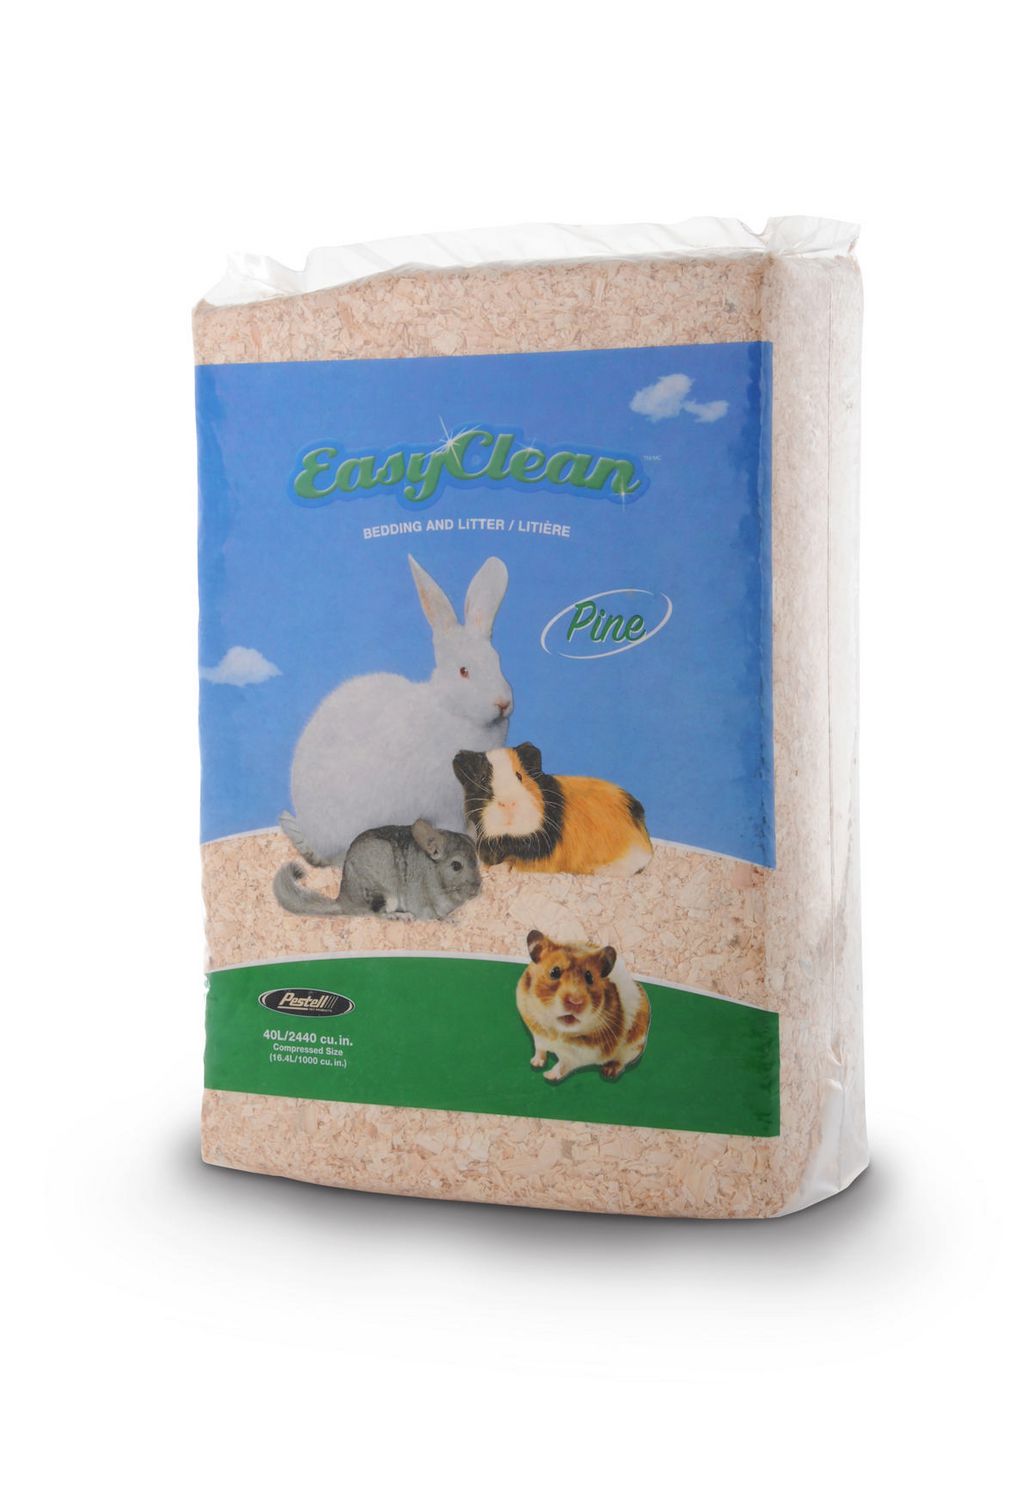 PESTELL EASY CLEAN PINE 40L SMALL ANIMAL BEDDING